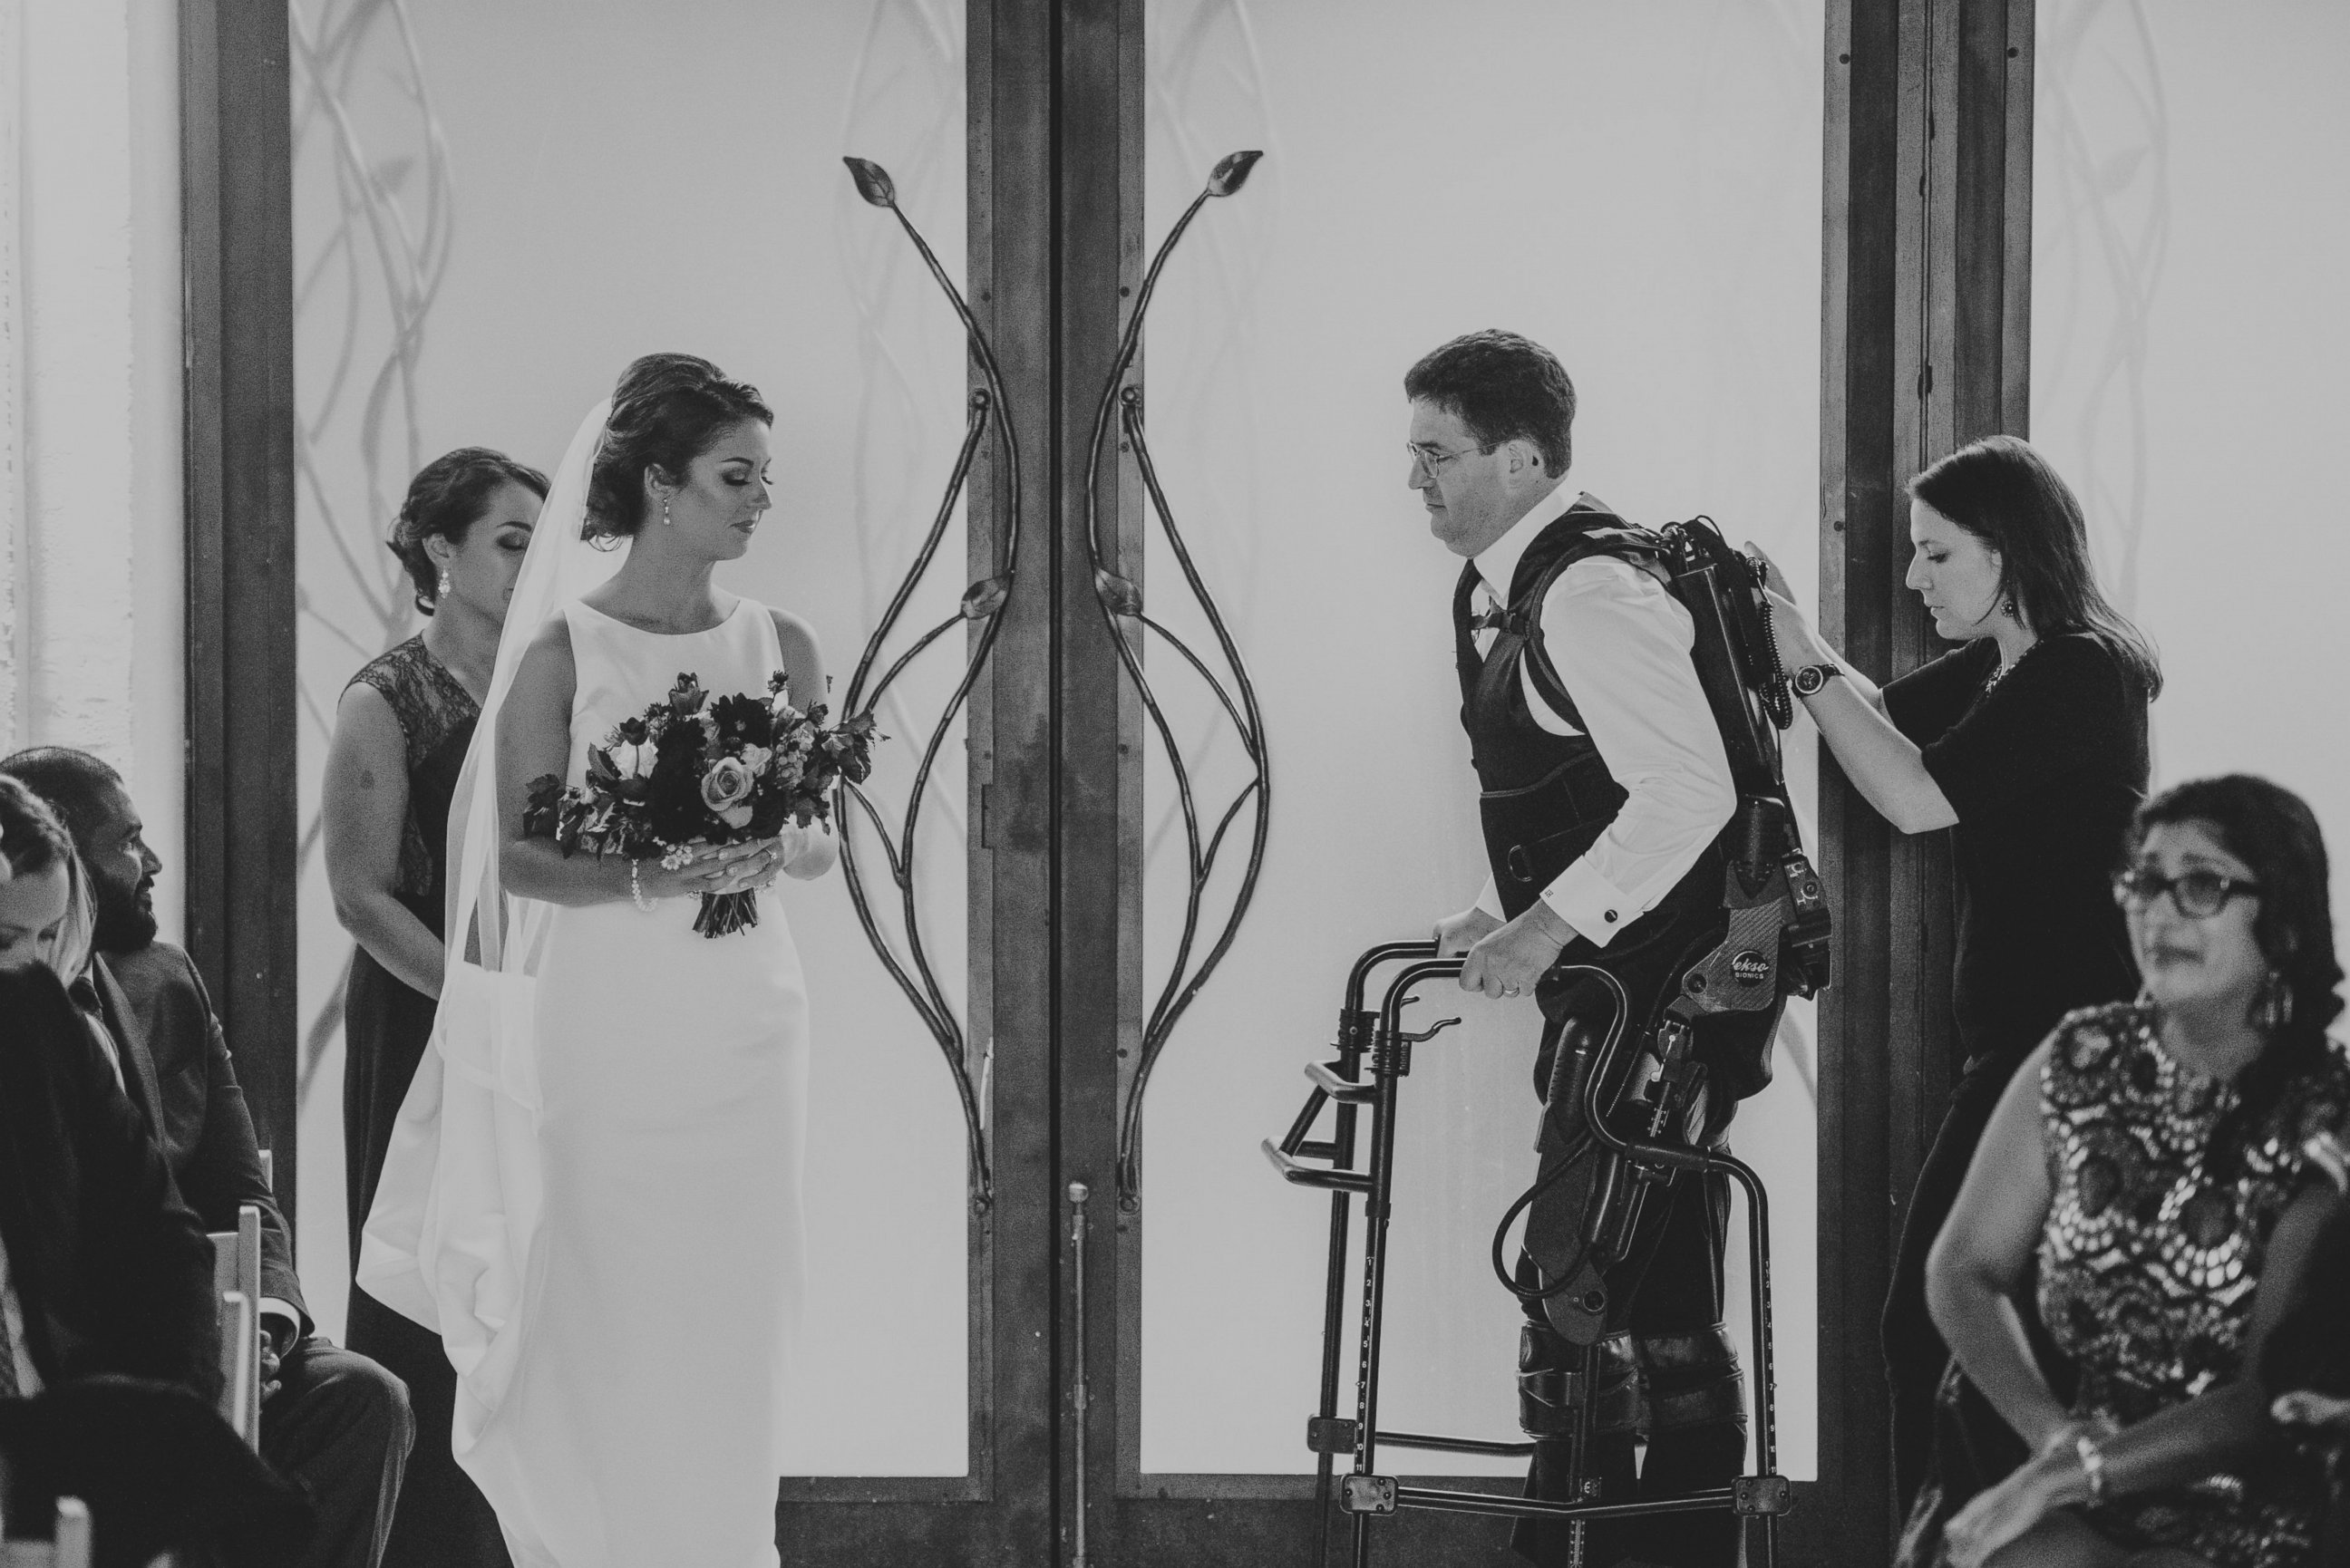 PHOTO: Scott Holland didn't let his multiple sclerosis stop him from walking his daughter, Elise Holland, down the aisle. He surprised her on her wedding day by using an exoskeleton to help him walk. 